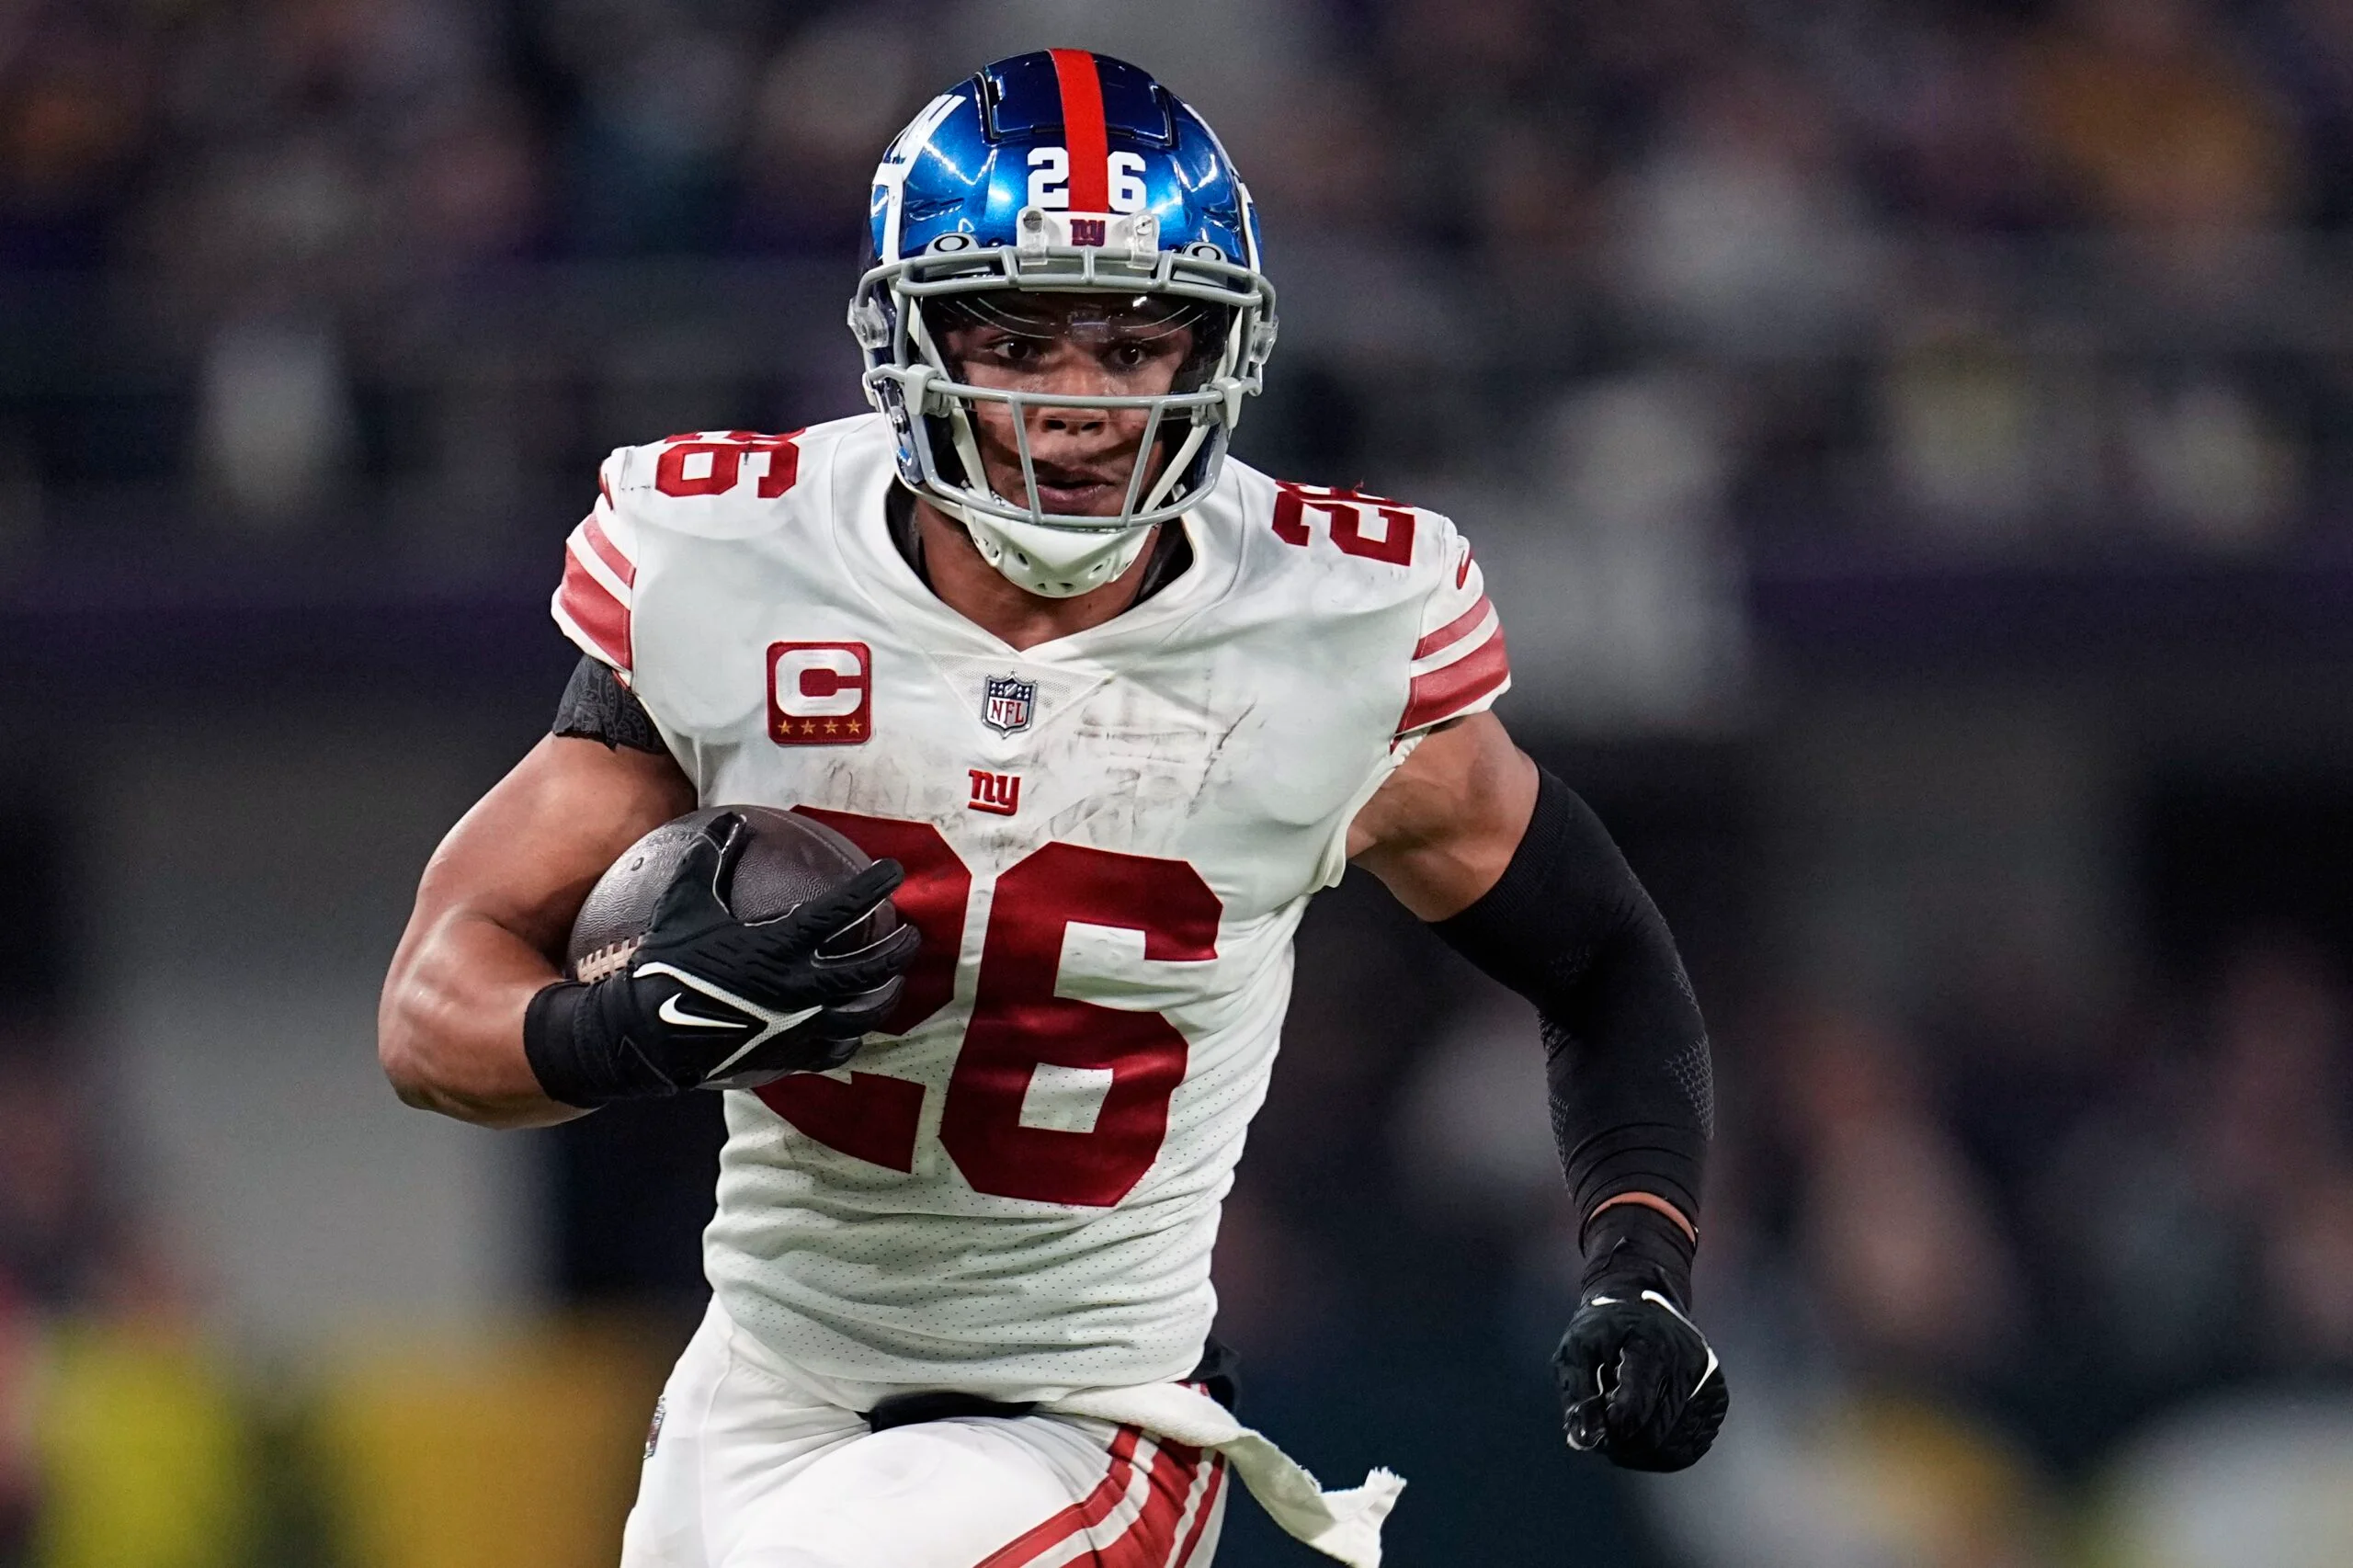 NFL News: Saquon Barkley Speaks Out NO OFFER from New York Giants Sparked Philadelphia Eagles Move